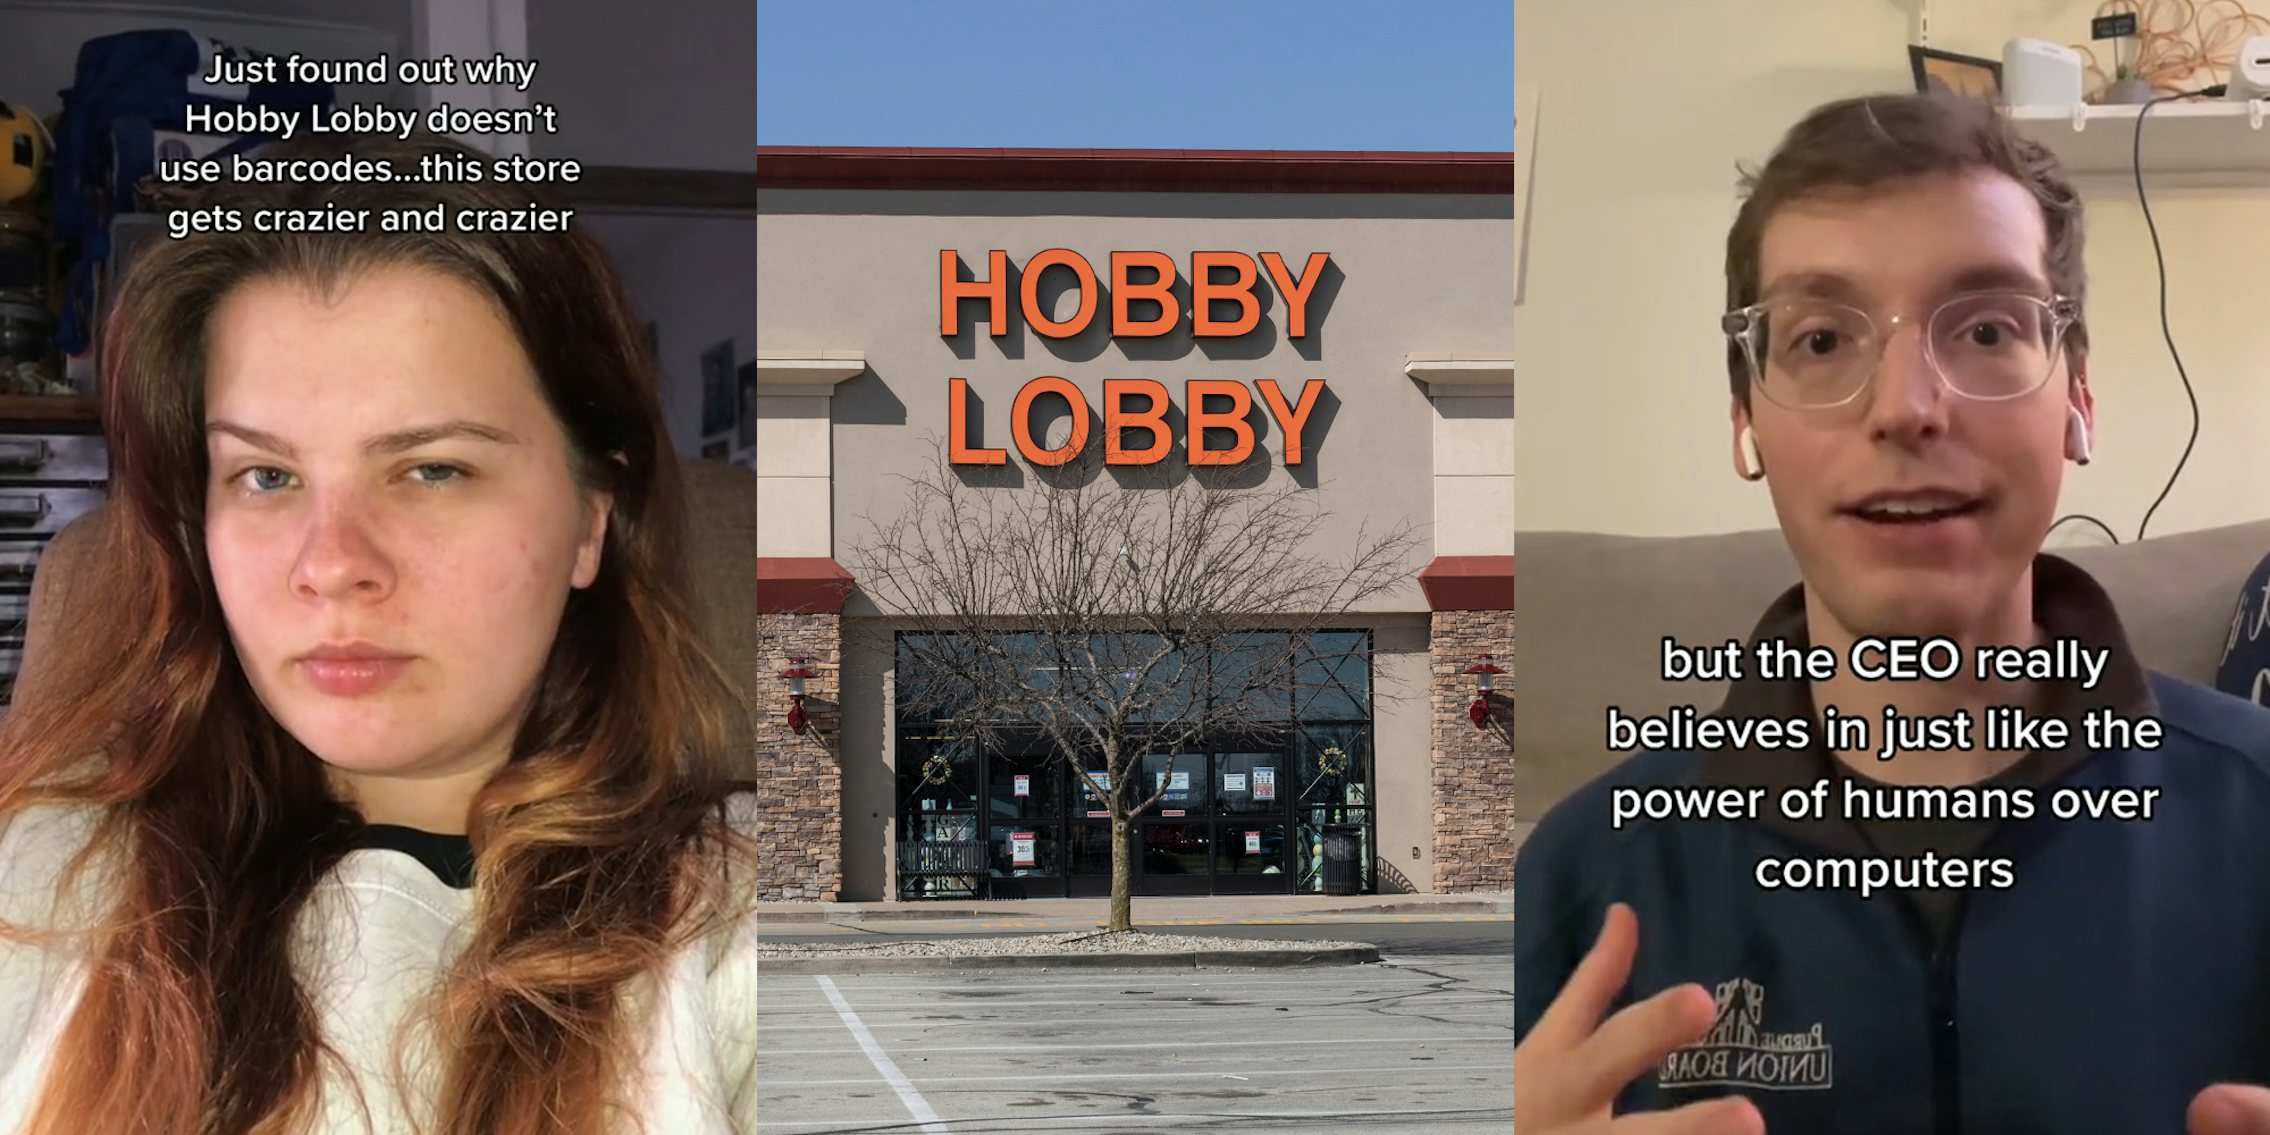 woman with caption 'Just found out Hobby Lobby doesn't use barcodes... this store gets crazier and crazier' (l) Hobby Lobby sign on building (c) former Hobby Lobby employee speaking with caption 'but the CEO really believes in just like the power of humans over computers' (r)